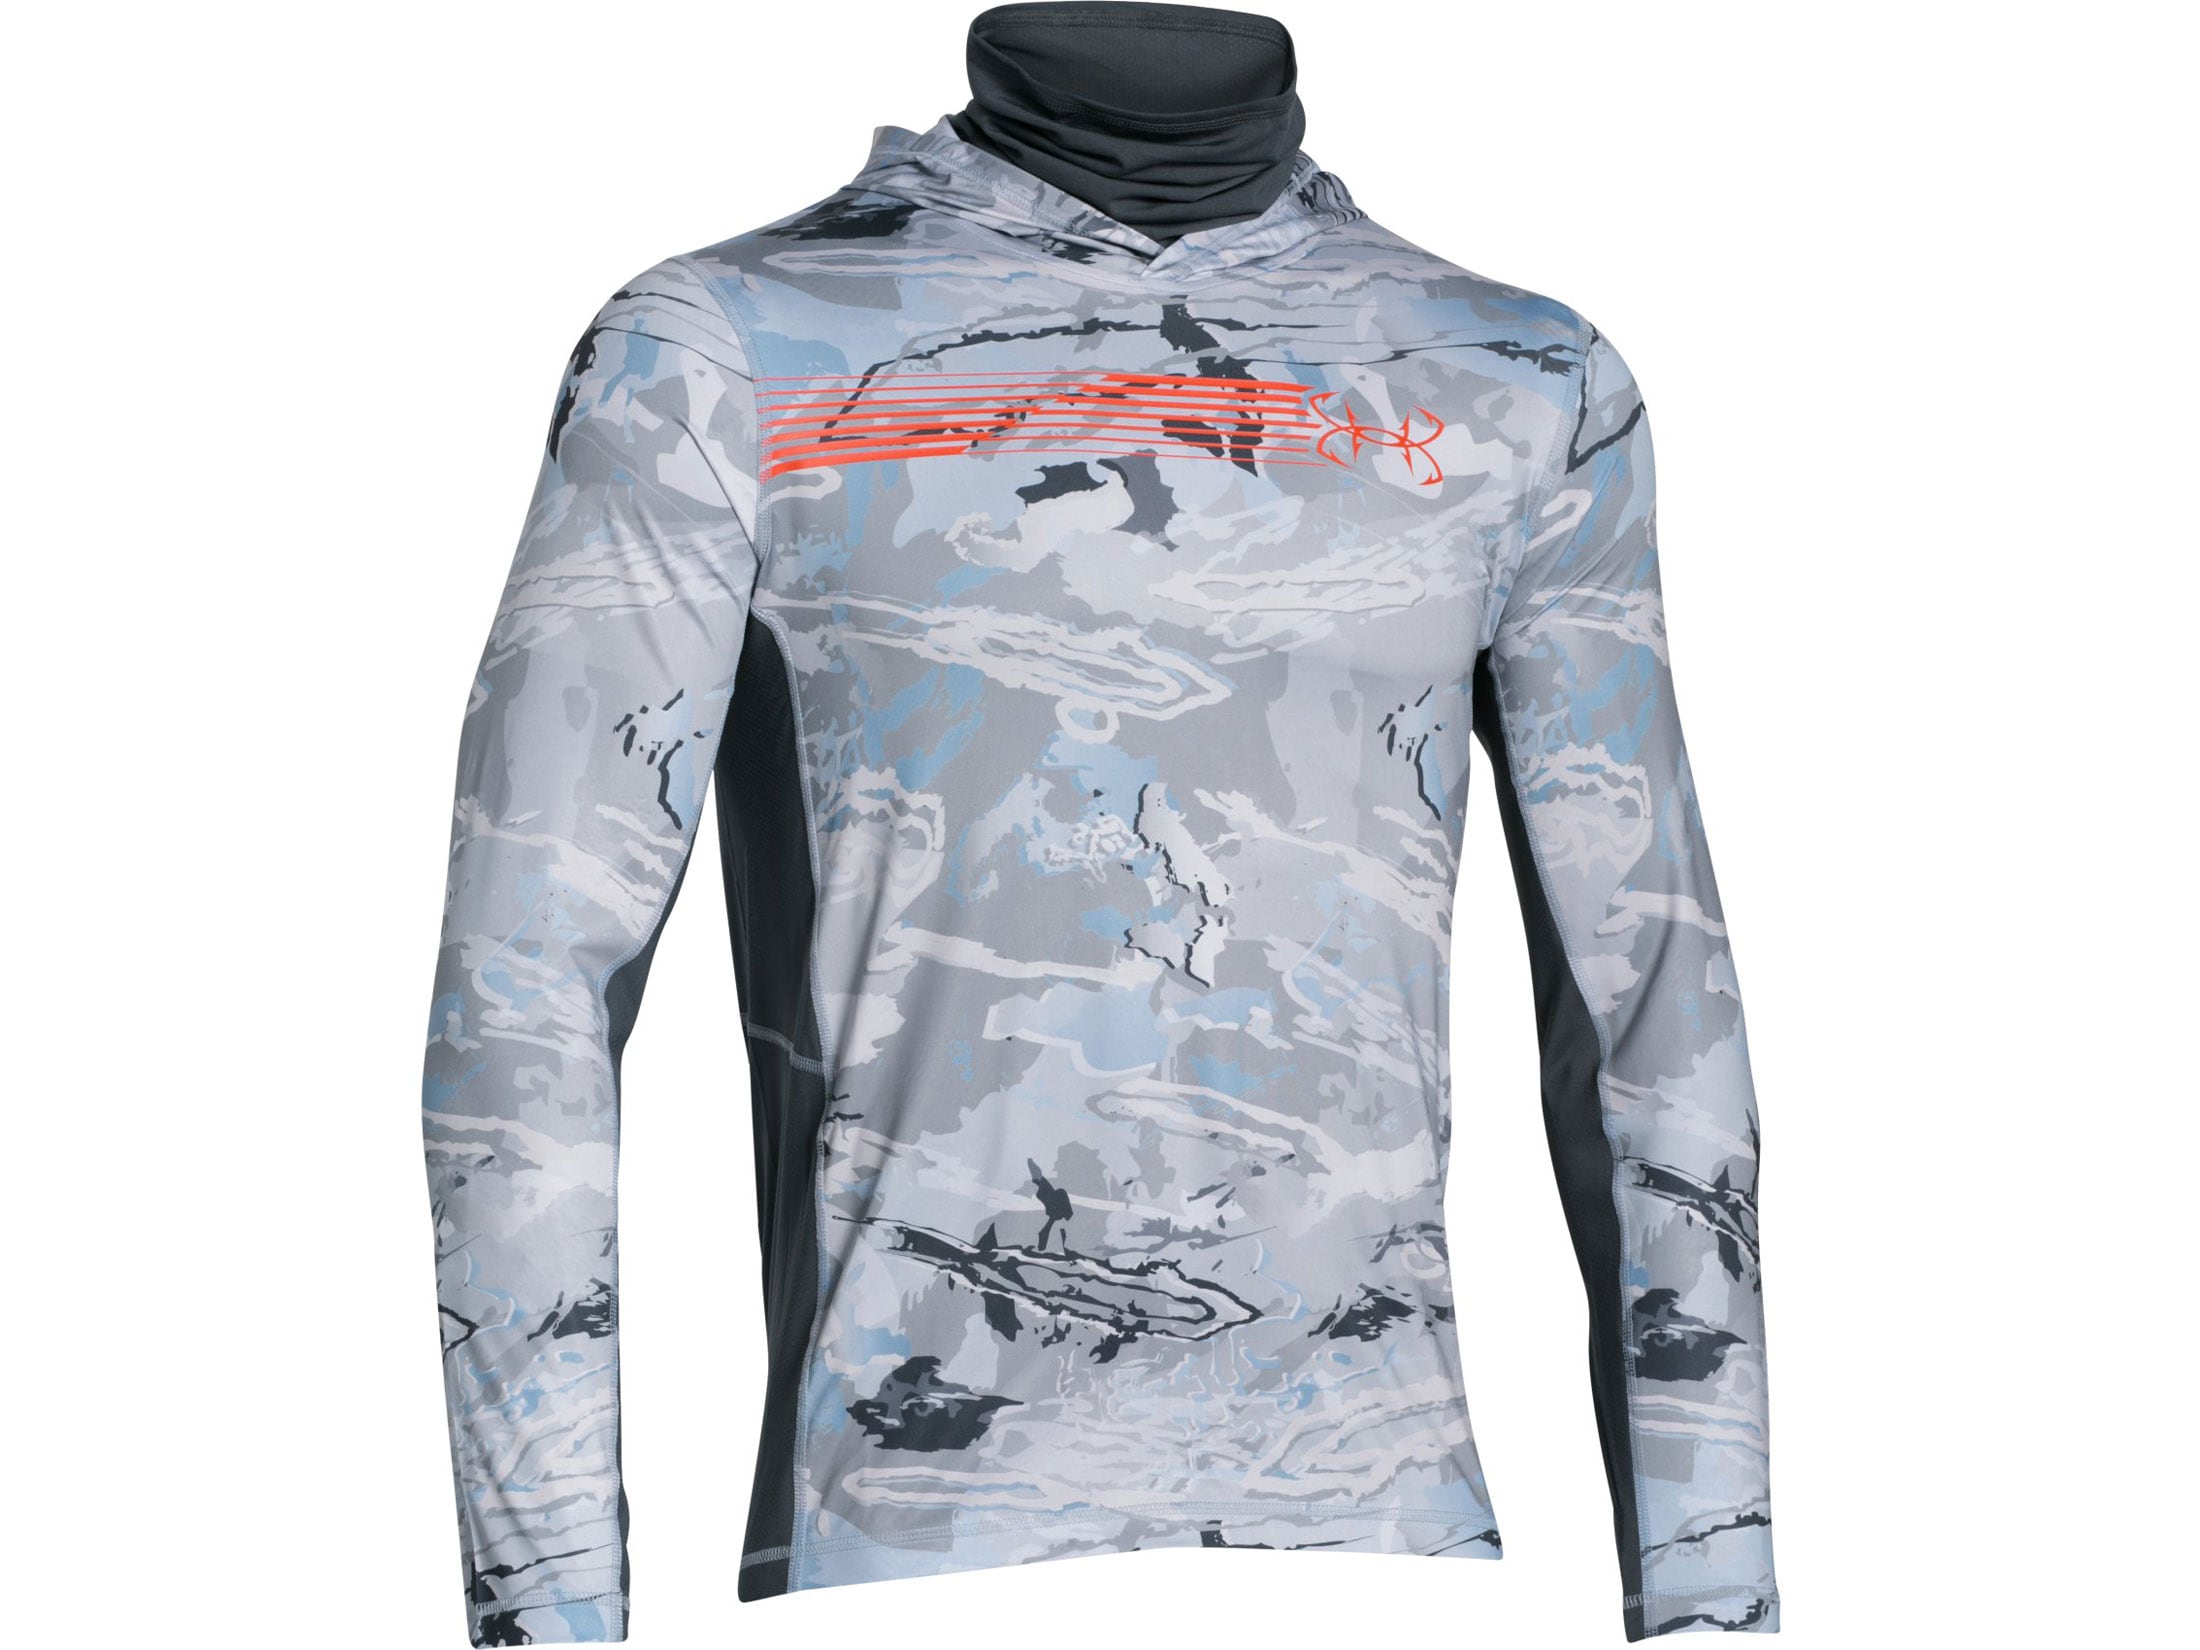 under armour men's coolswitch thermocline hoodie